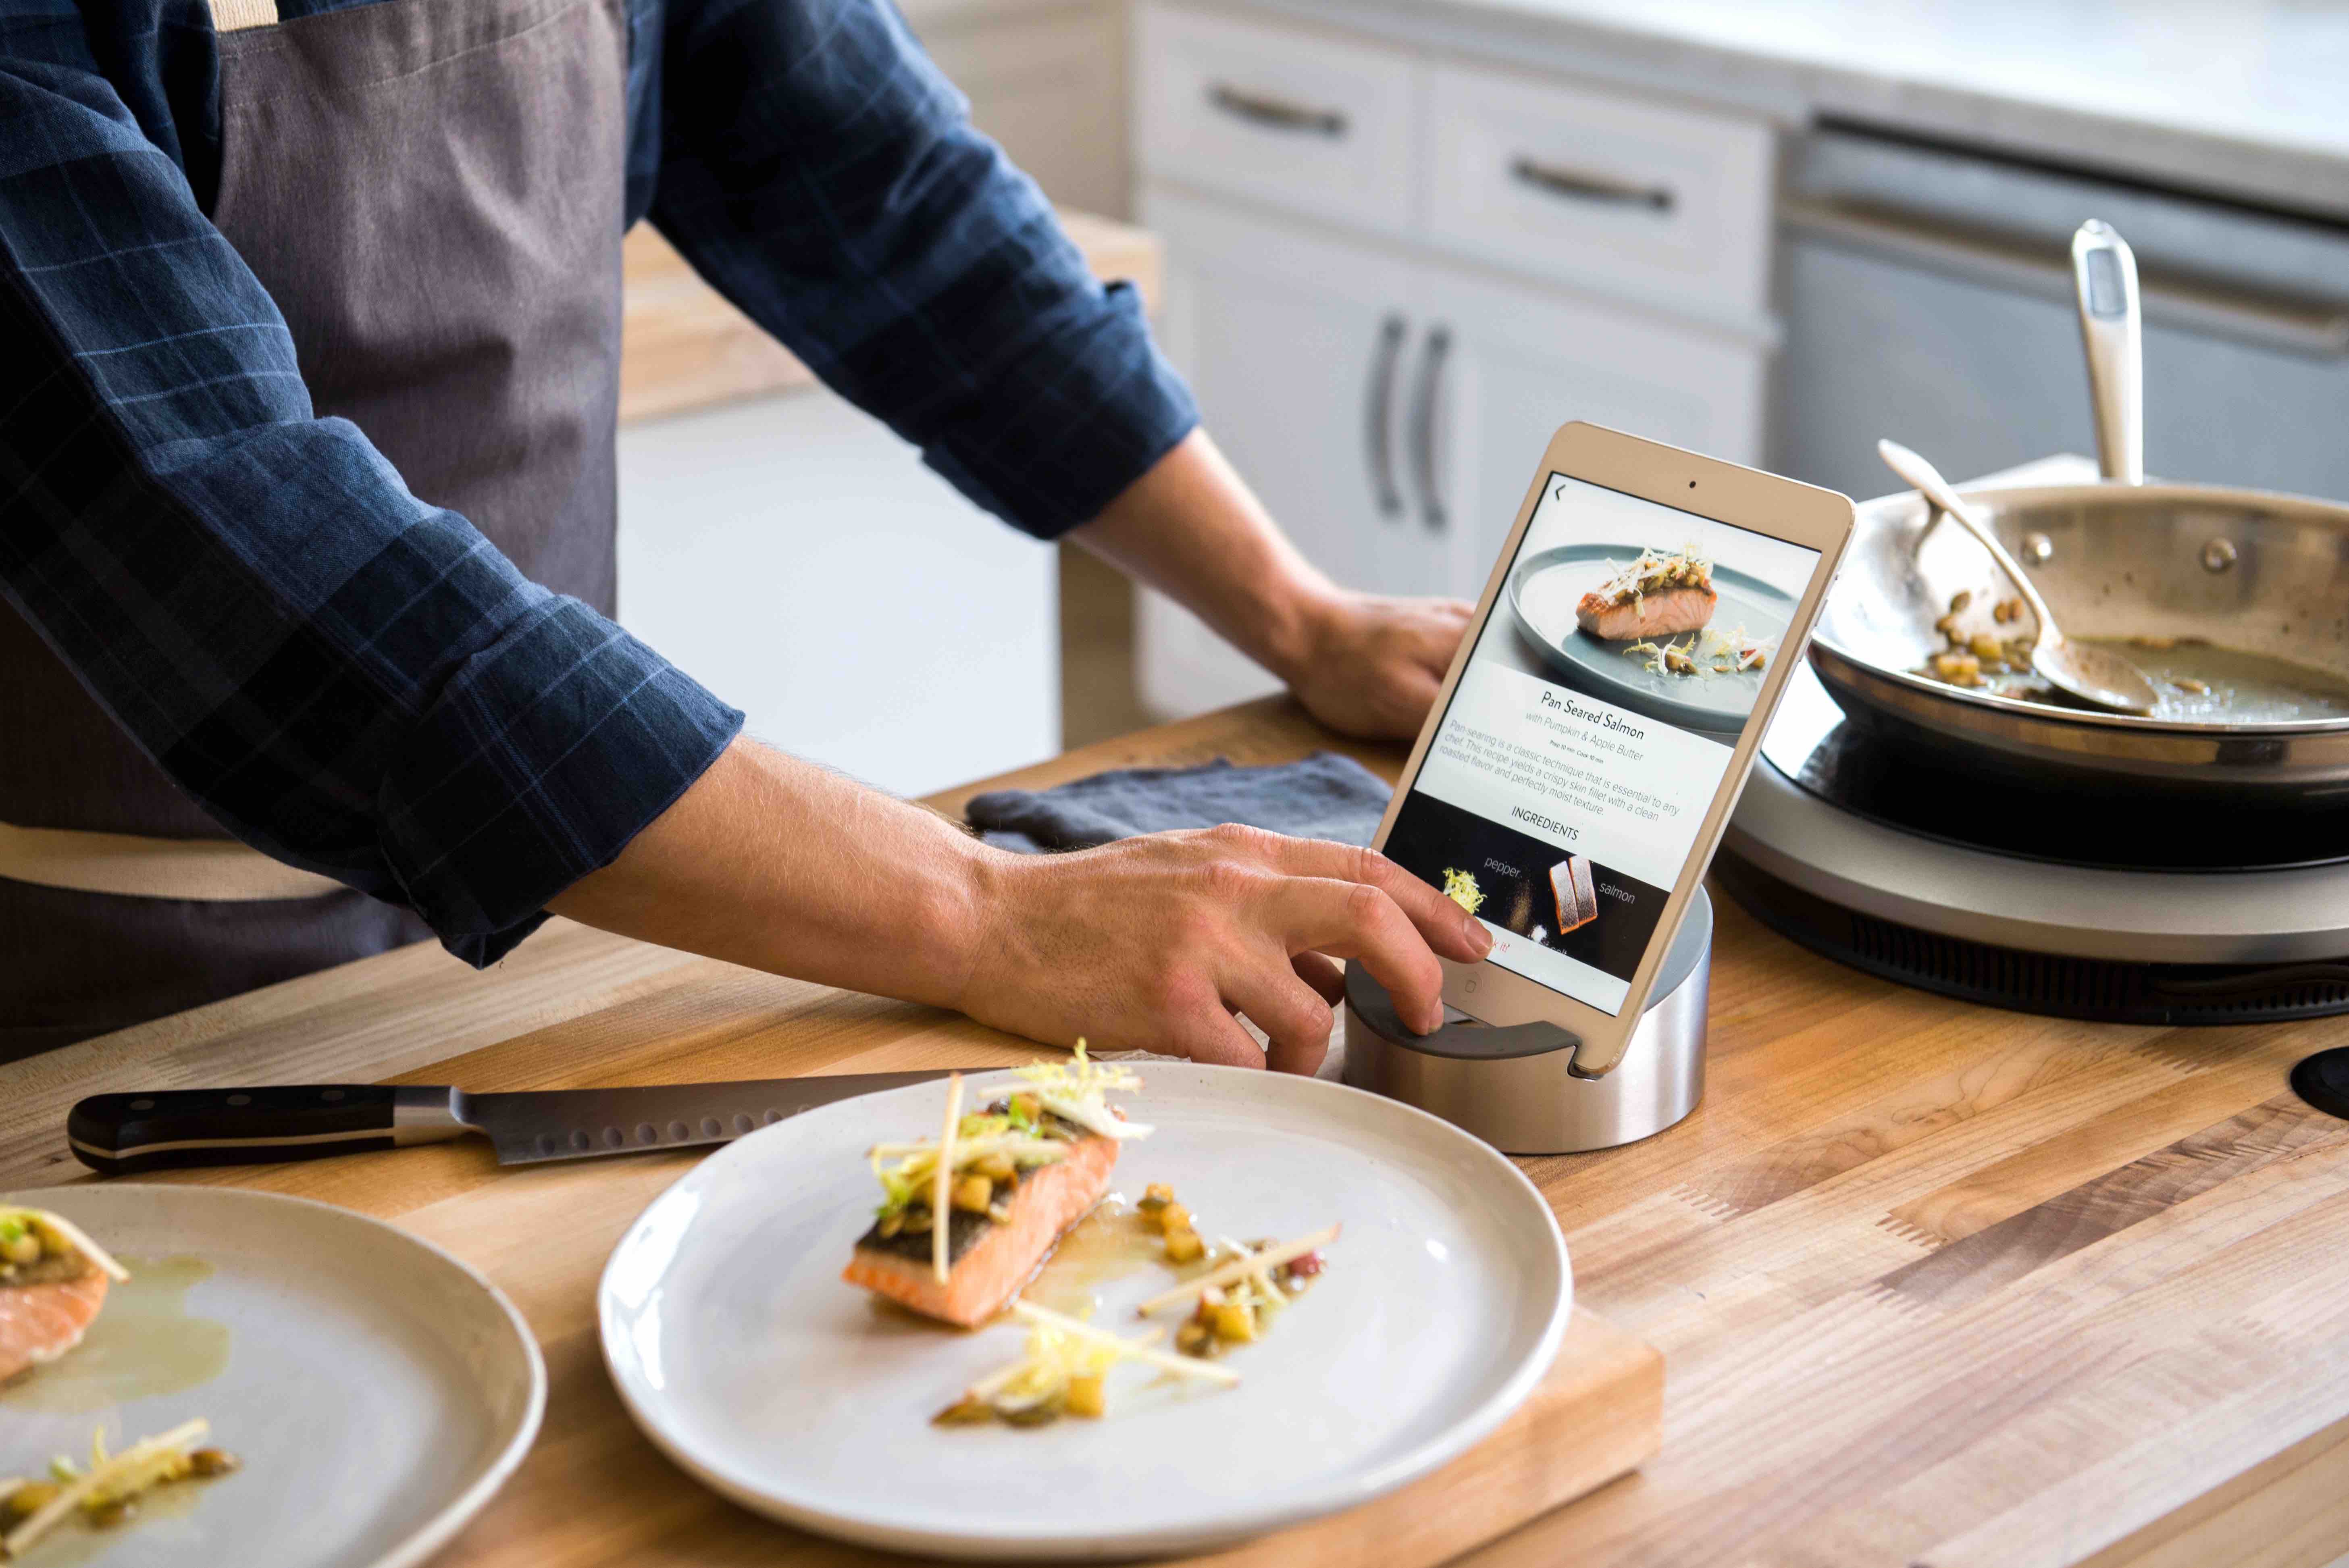 3 Smart Kitchen Gadgets to Take the Guesswork Out of Cooking - HomeAdvisor